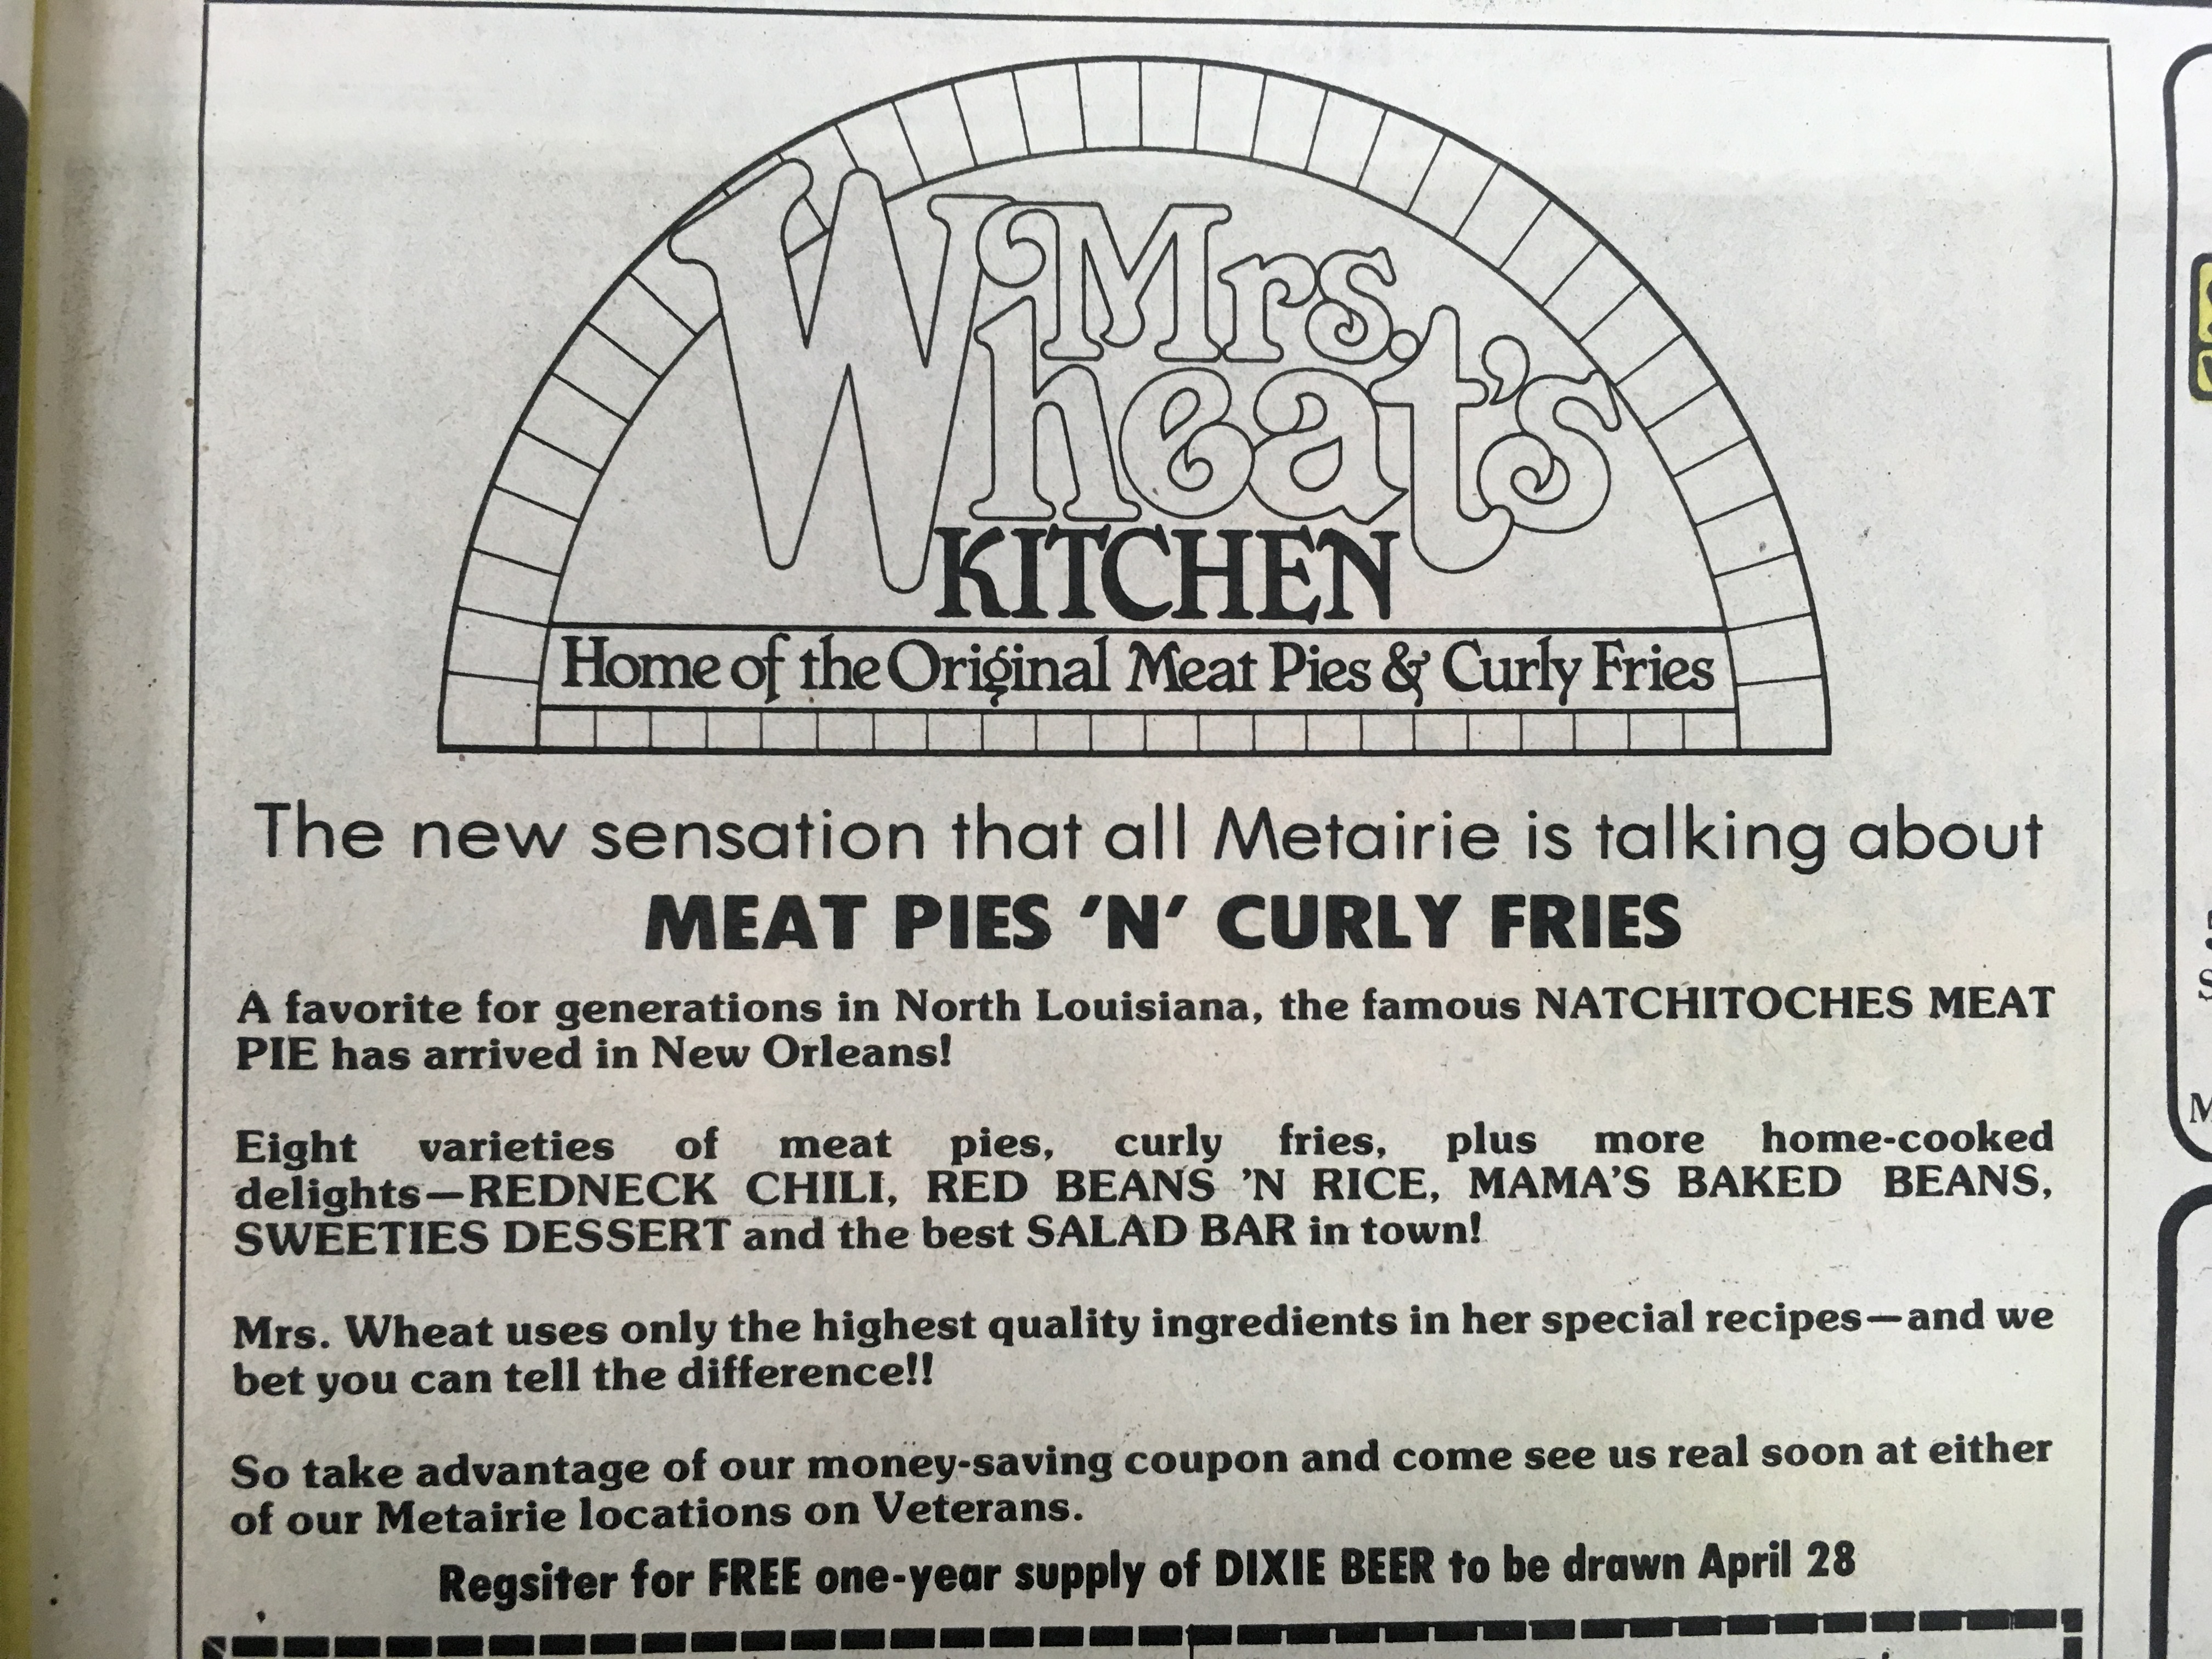 VMrs Whea V Kitchen O Home of the Original Meat Pies & Curly Fries The new sensation that all Metairie is talking about Meat Pies 'N' Curly Fries A favorite for generations in North Louisiana, the famous Natchitoches Meat Pie has arrived in New Orleans!…